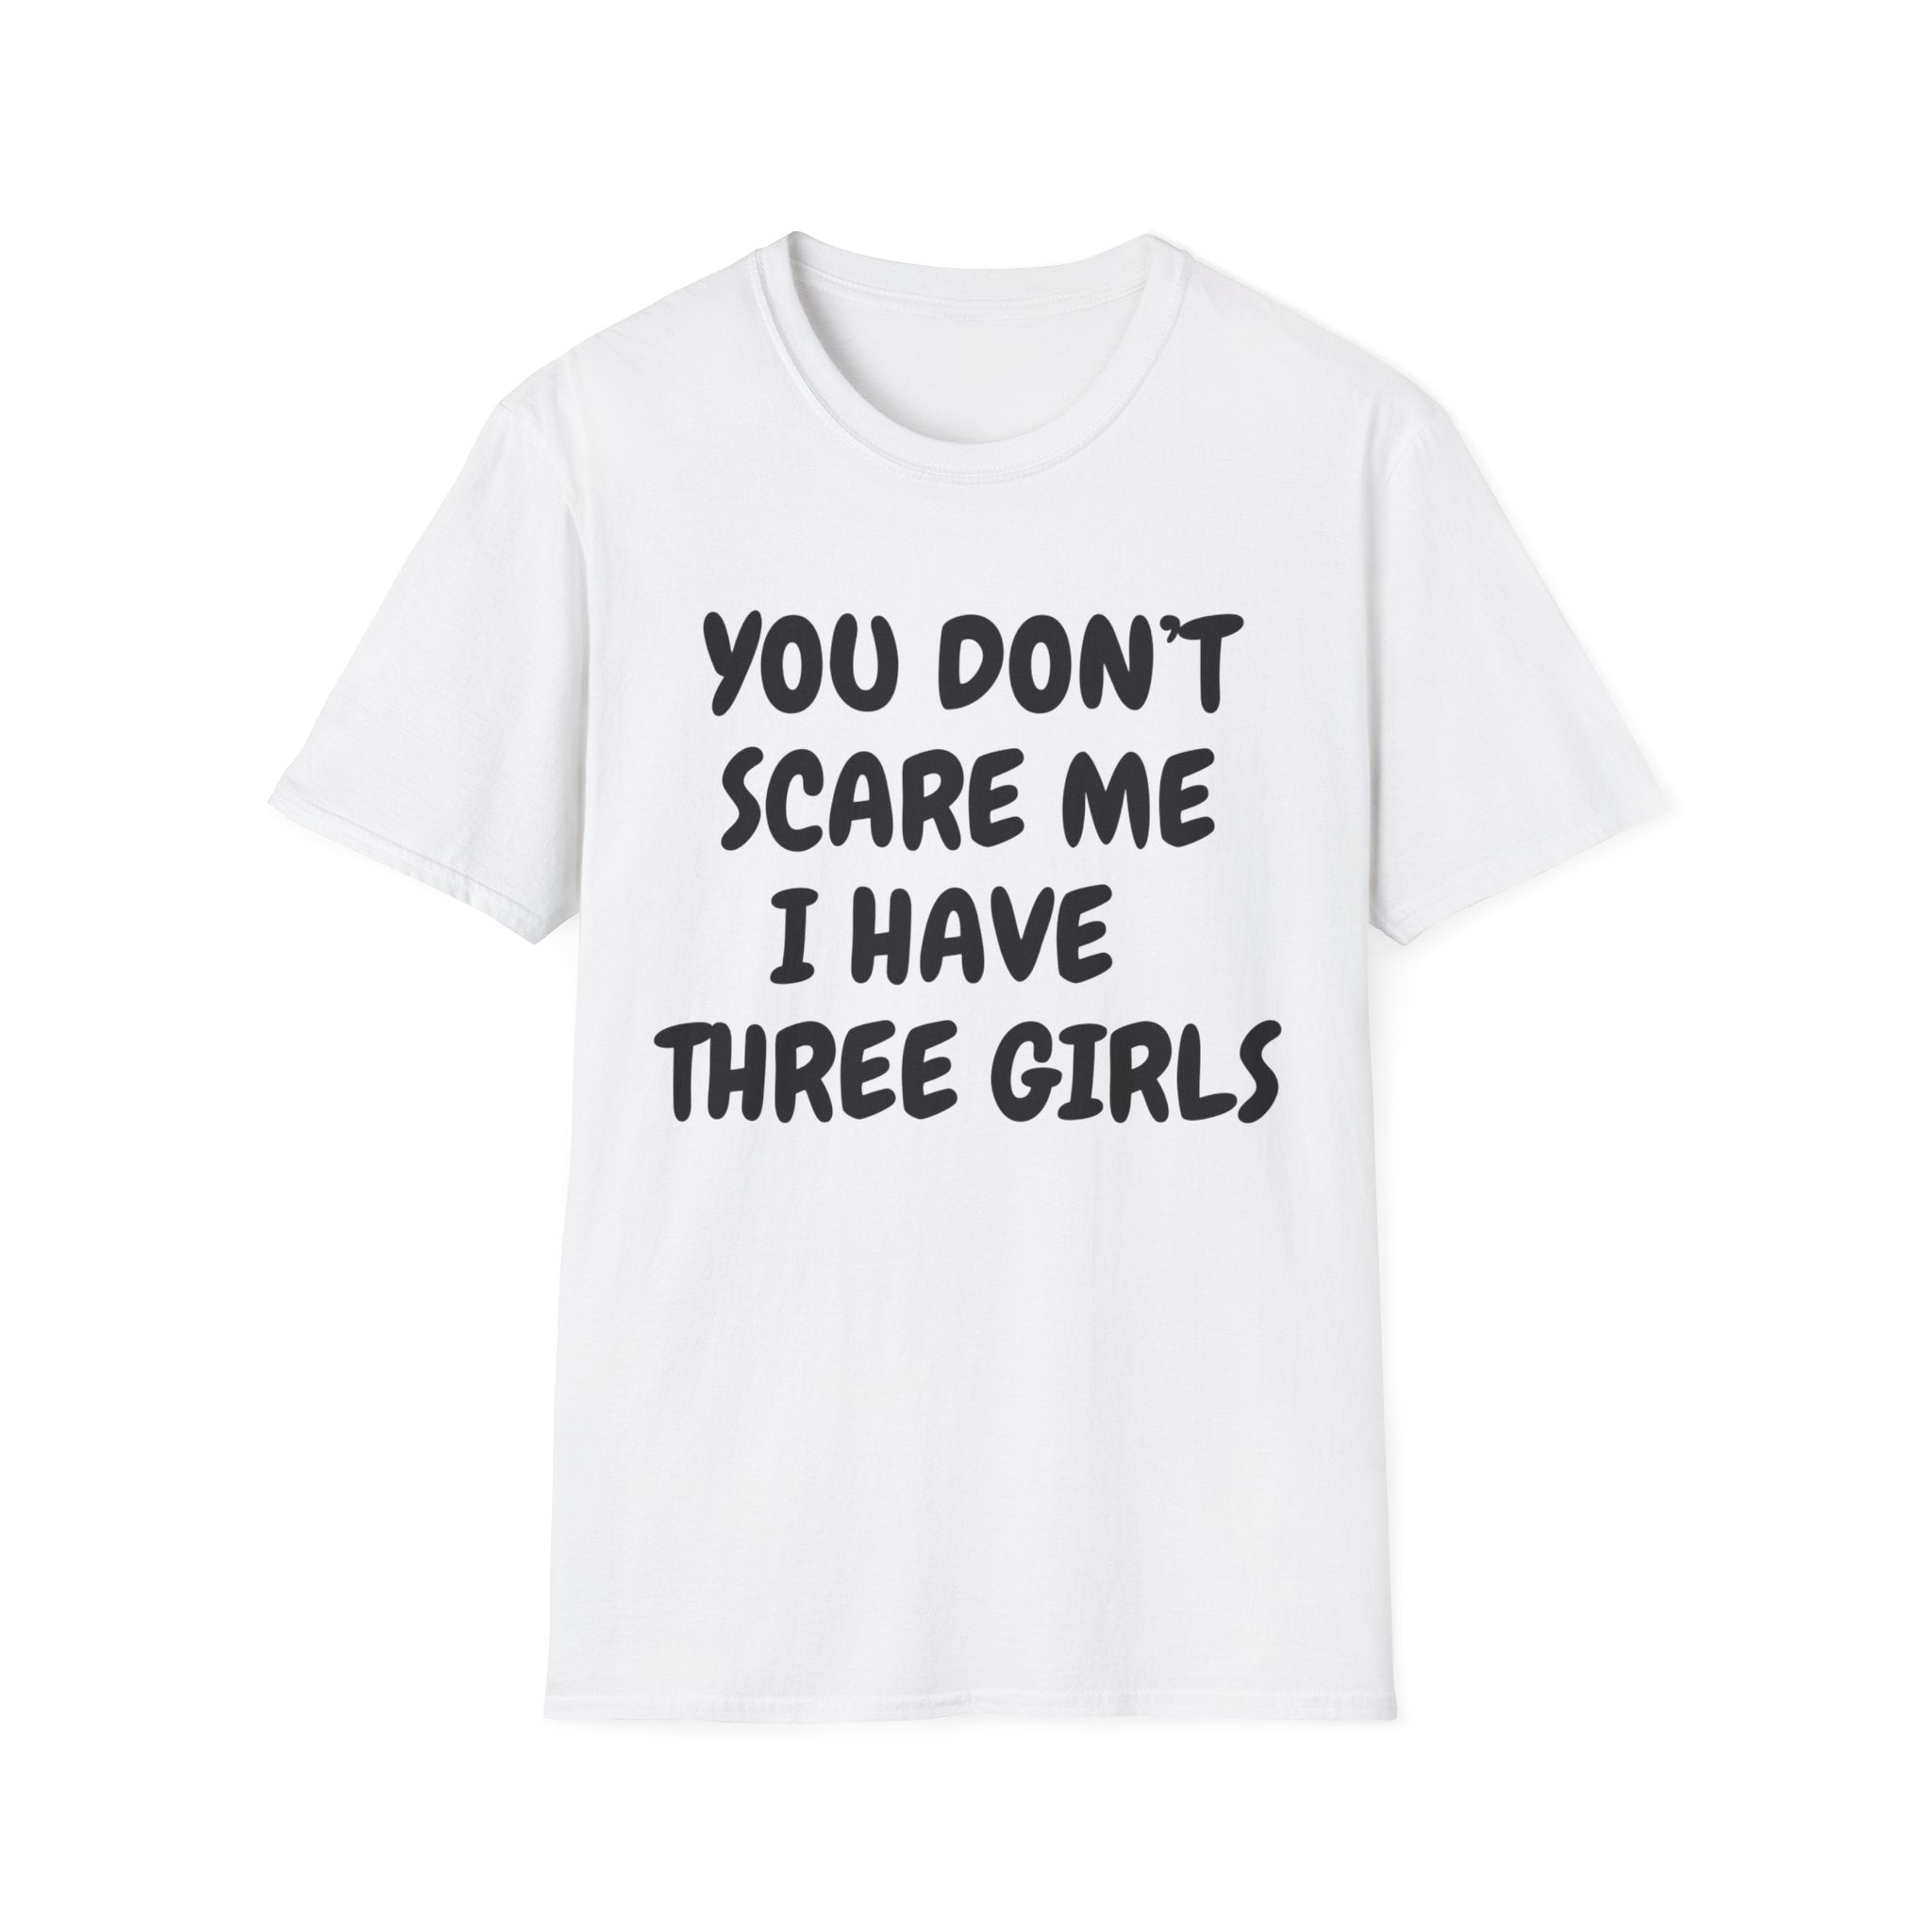 You Don't Scare Me I have Three Girls Funny Dad T-shirt, Father's Day Gift, Gift for Dad, Dad Shirt, Men's T-shirt